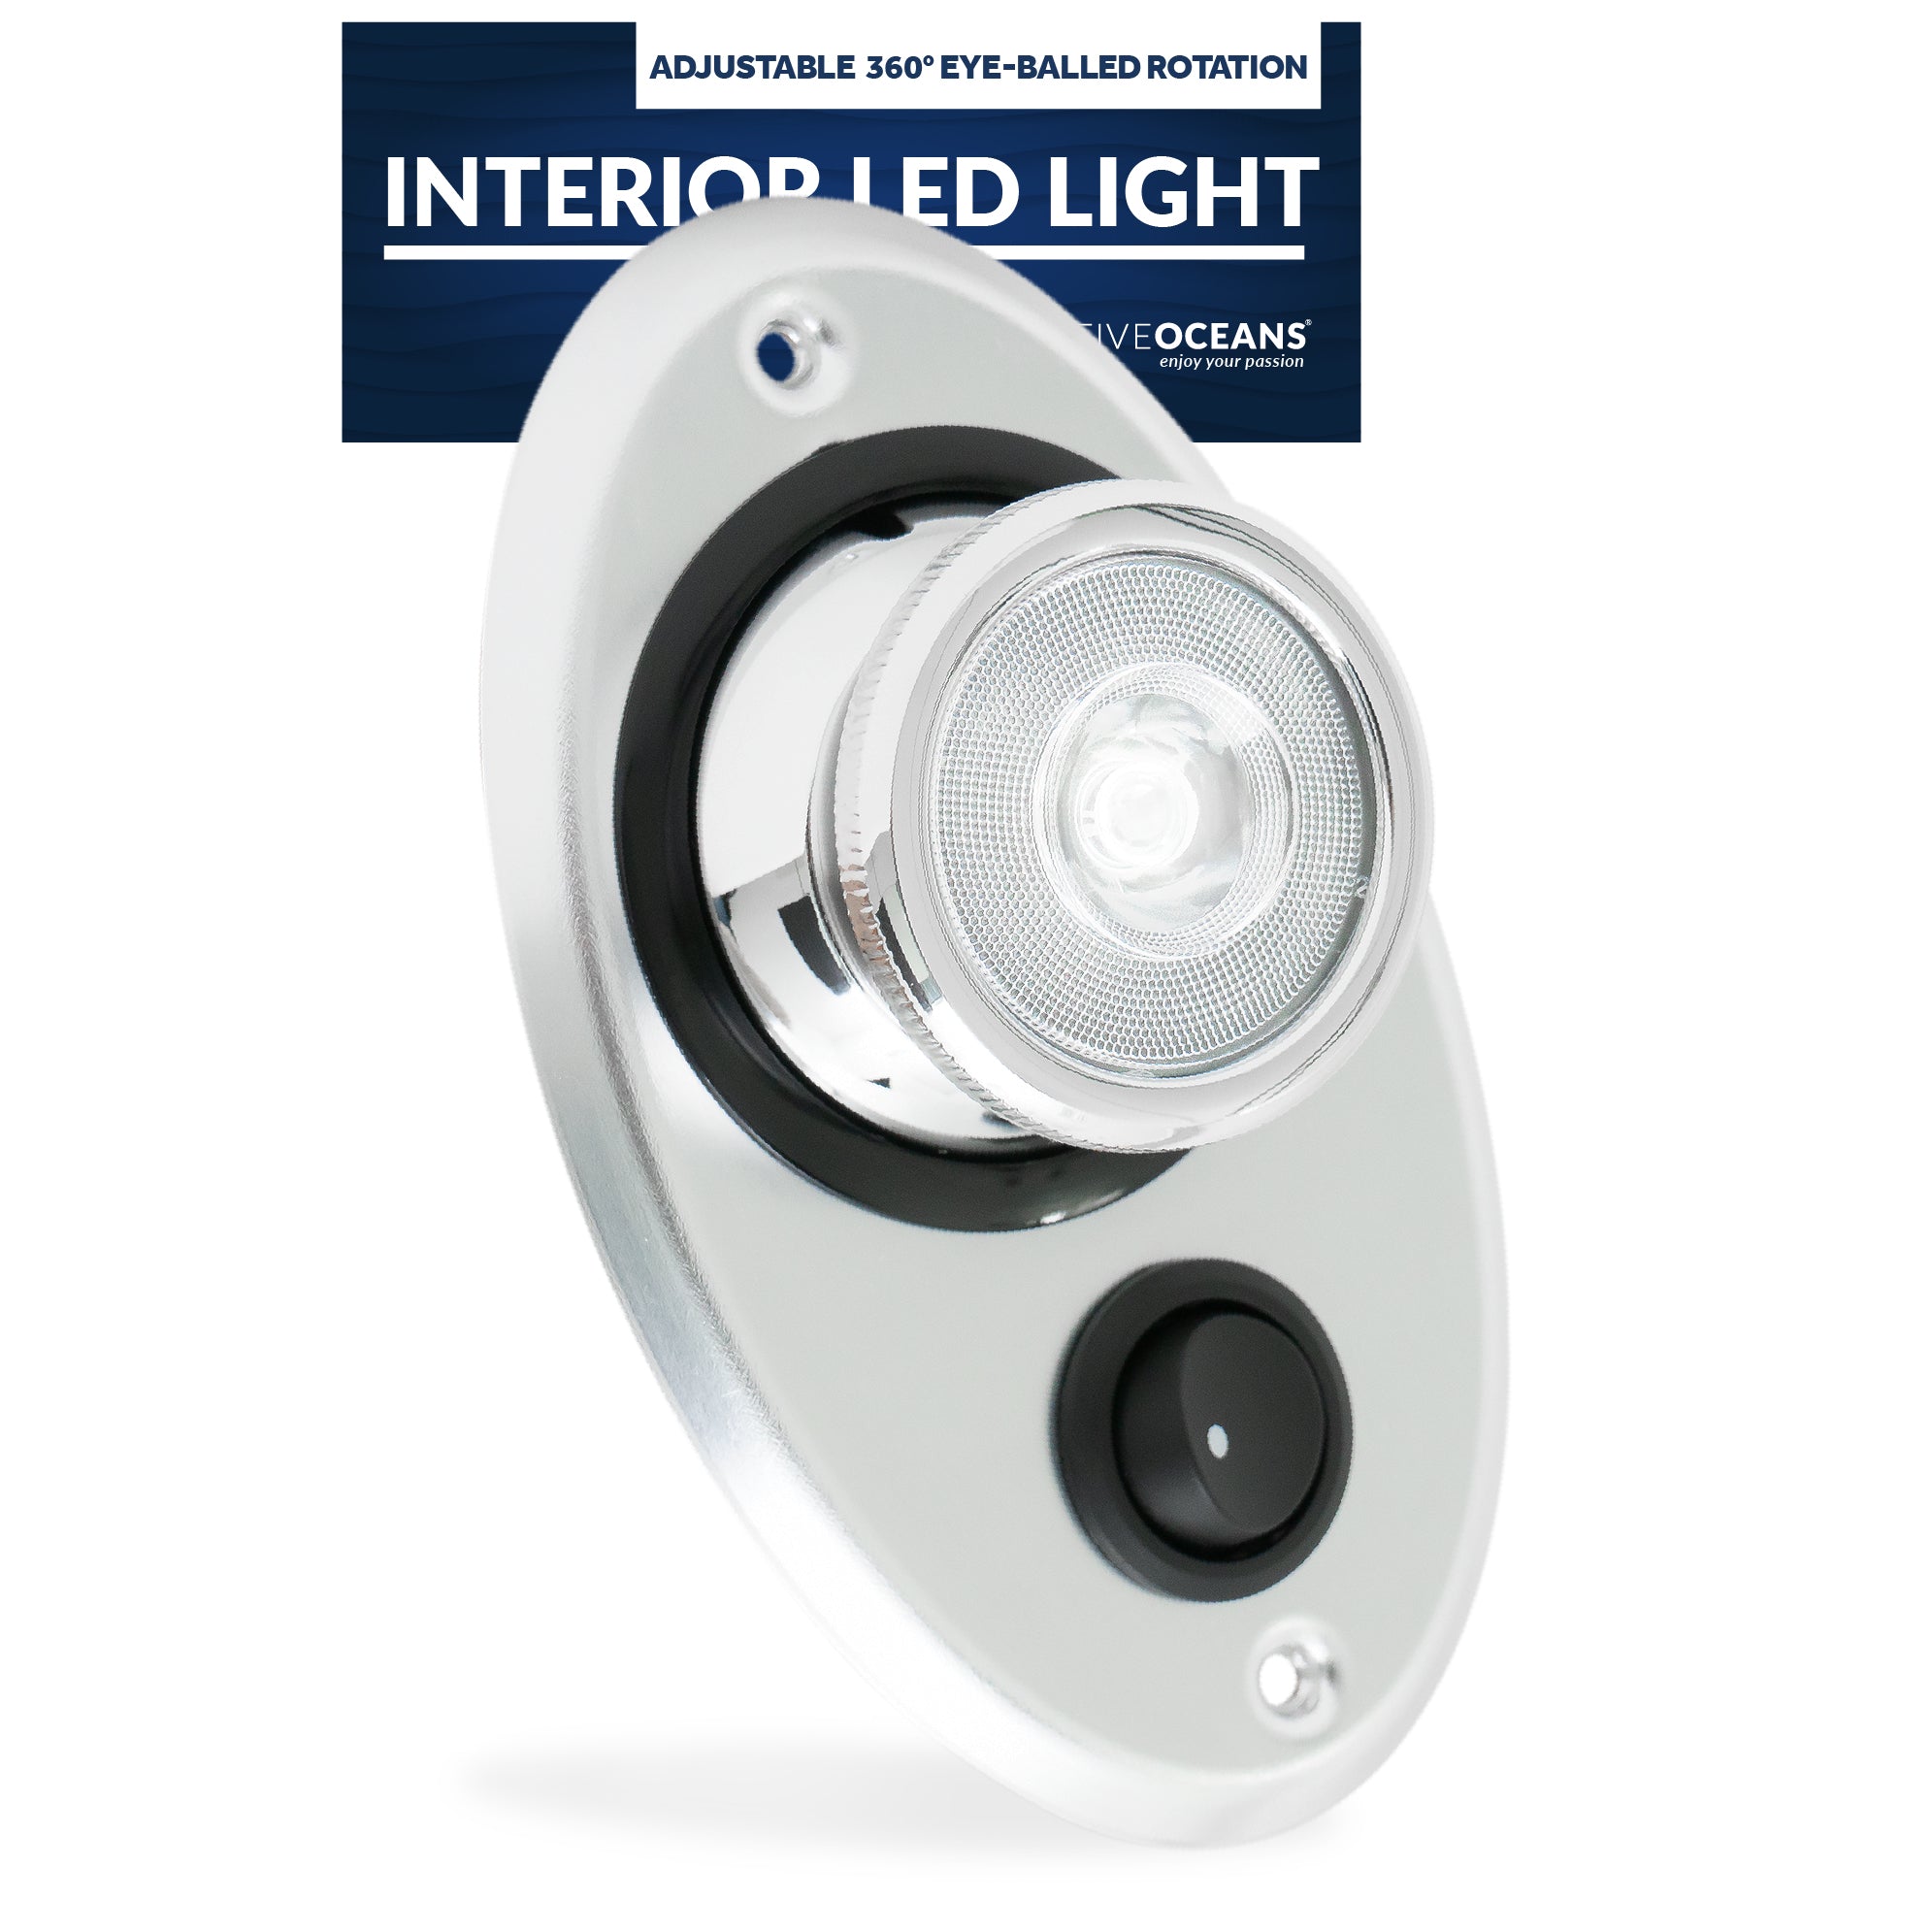 Interior LED light with Adjustable 360 Degree Eye-Balled Rotation, On/Off Rocker Switch - FO4596